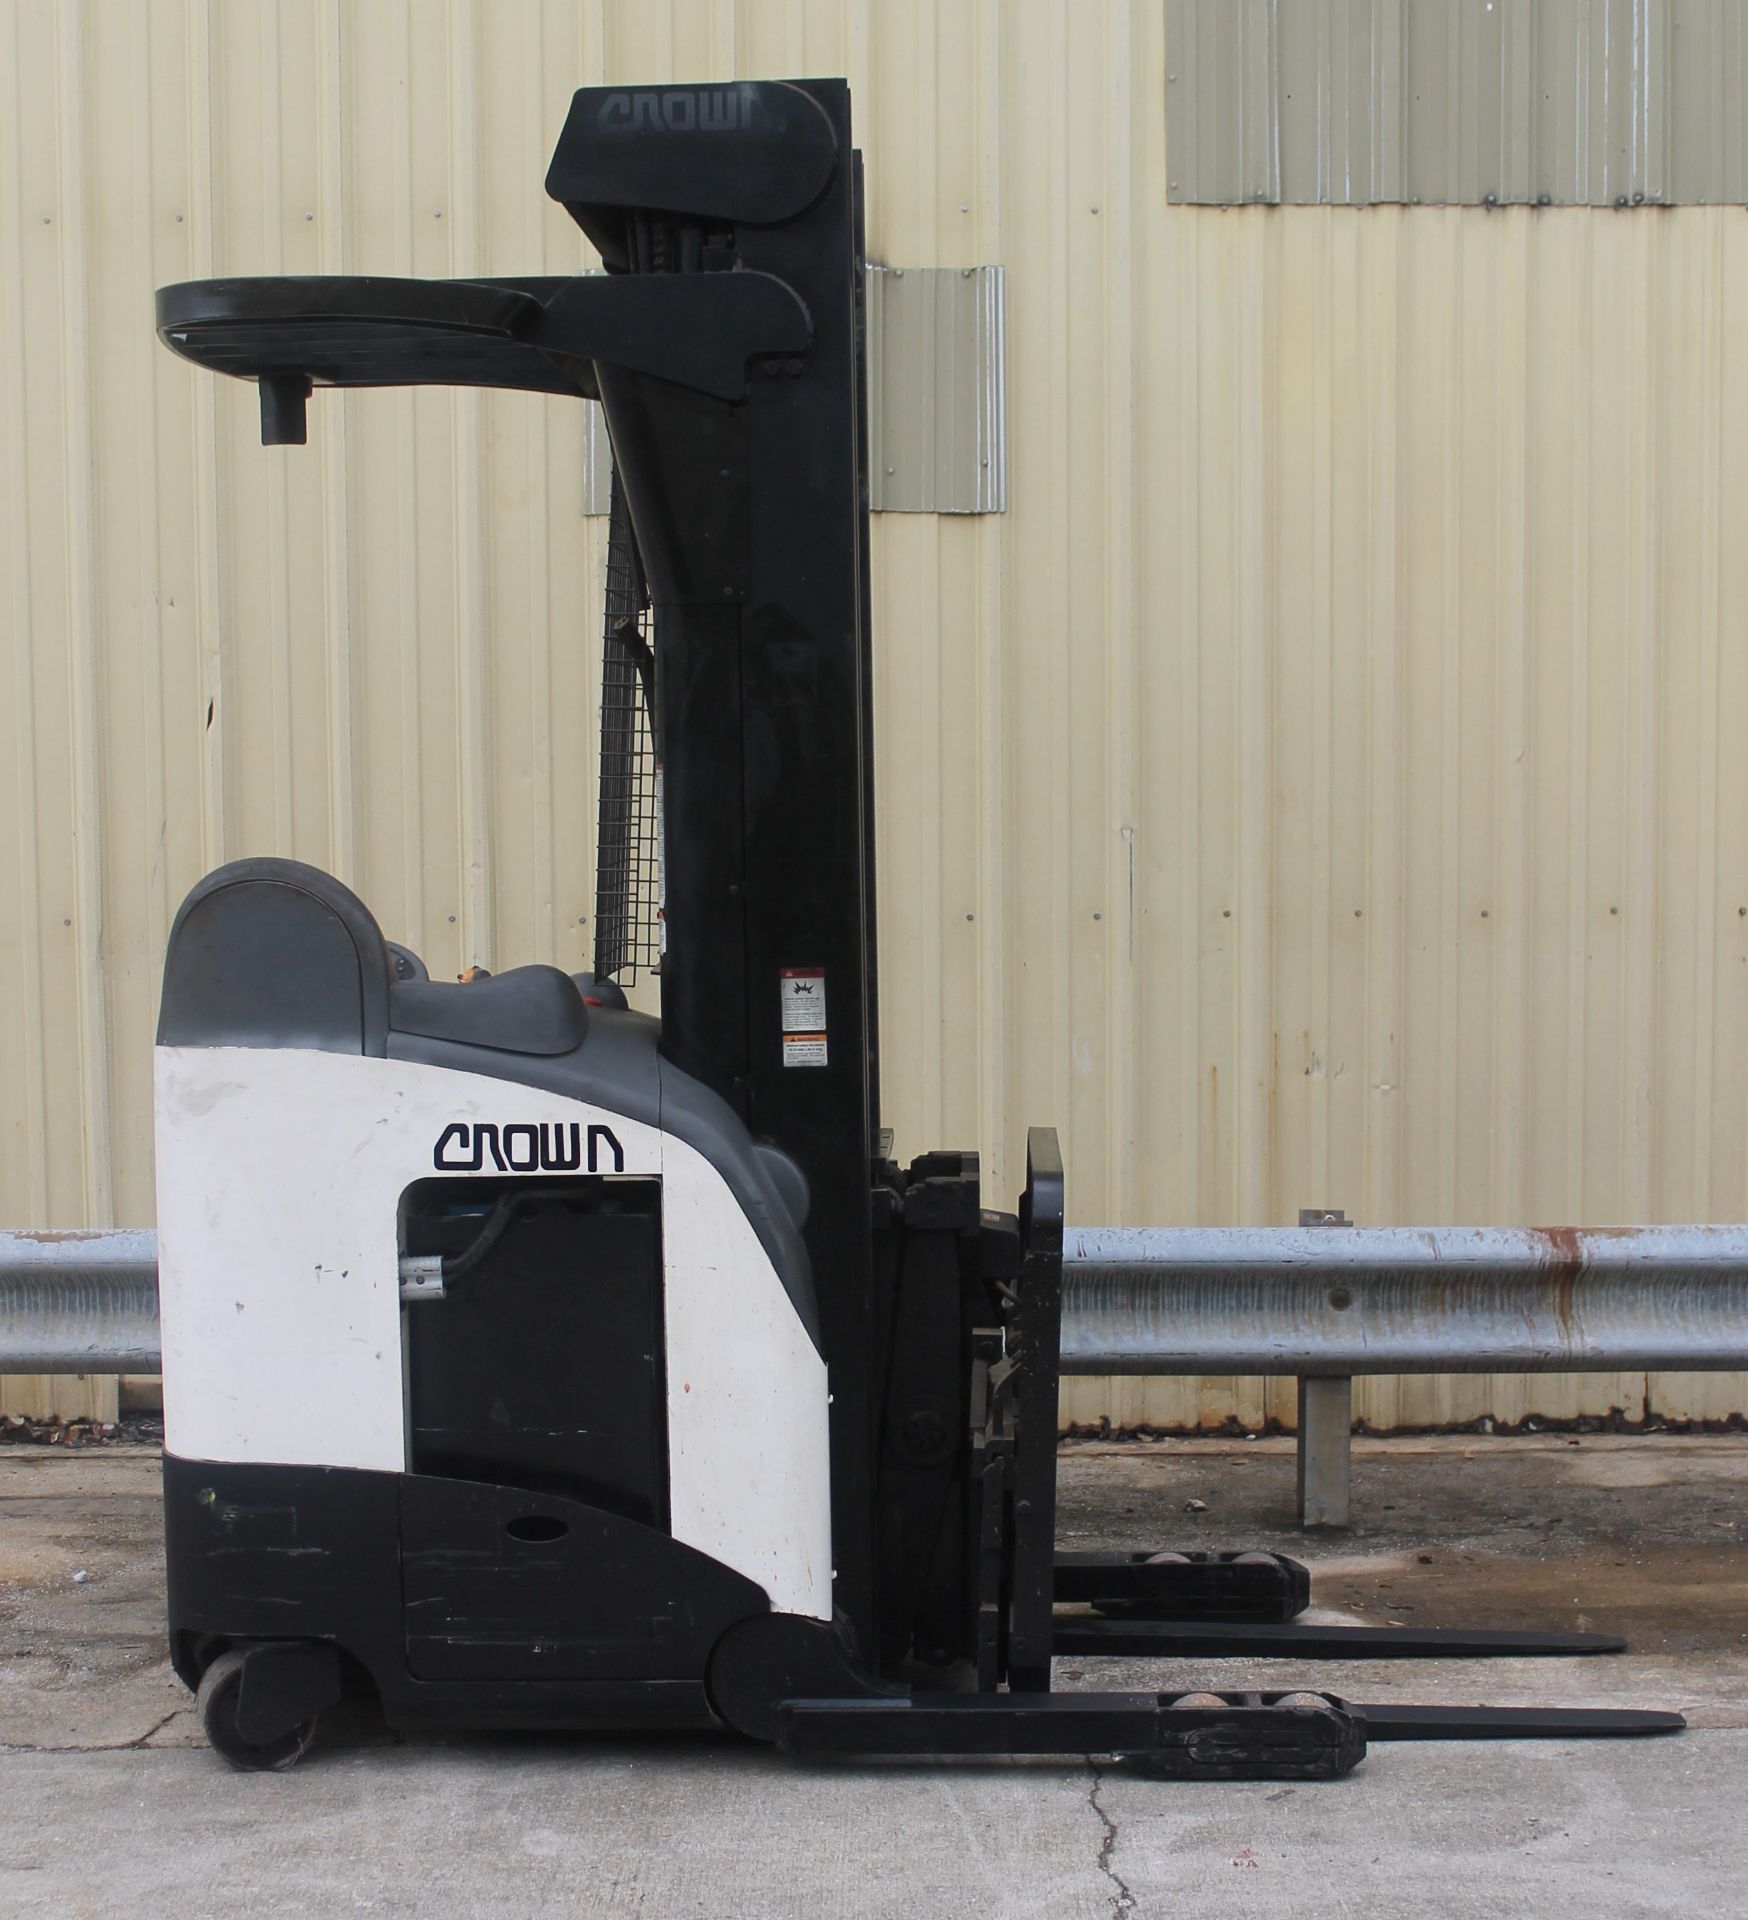 CROWN RD 5000 SERIES NARROW-AISLE REACH TRUCK, DOUBLE REACH, (WATCH VIDEO) - Image 2 of 6